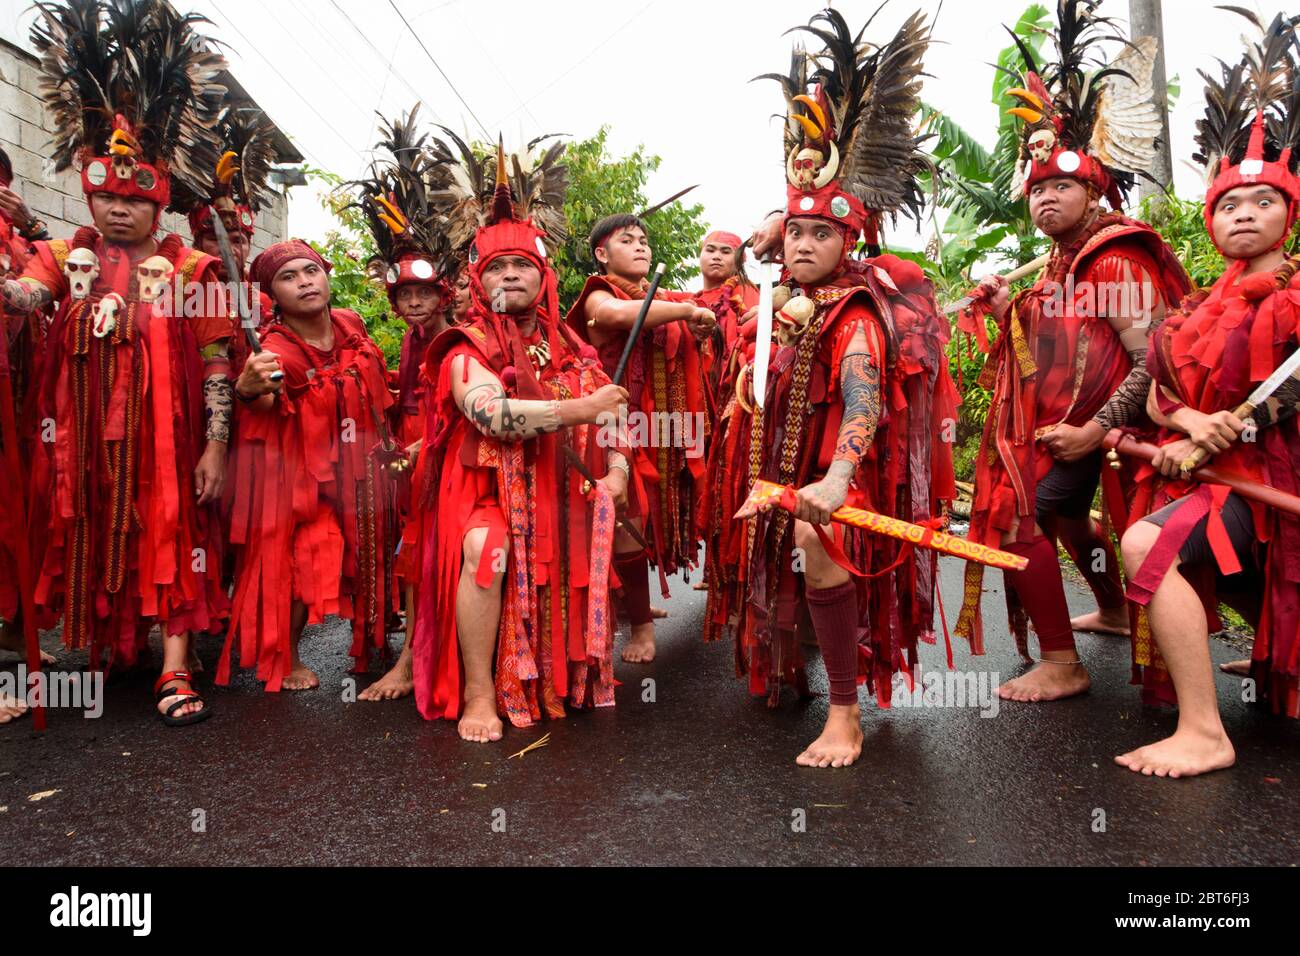 Group of Kabasaran dancers in Tomohon, North Sulawesi, Indonesia. Stock Photo